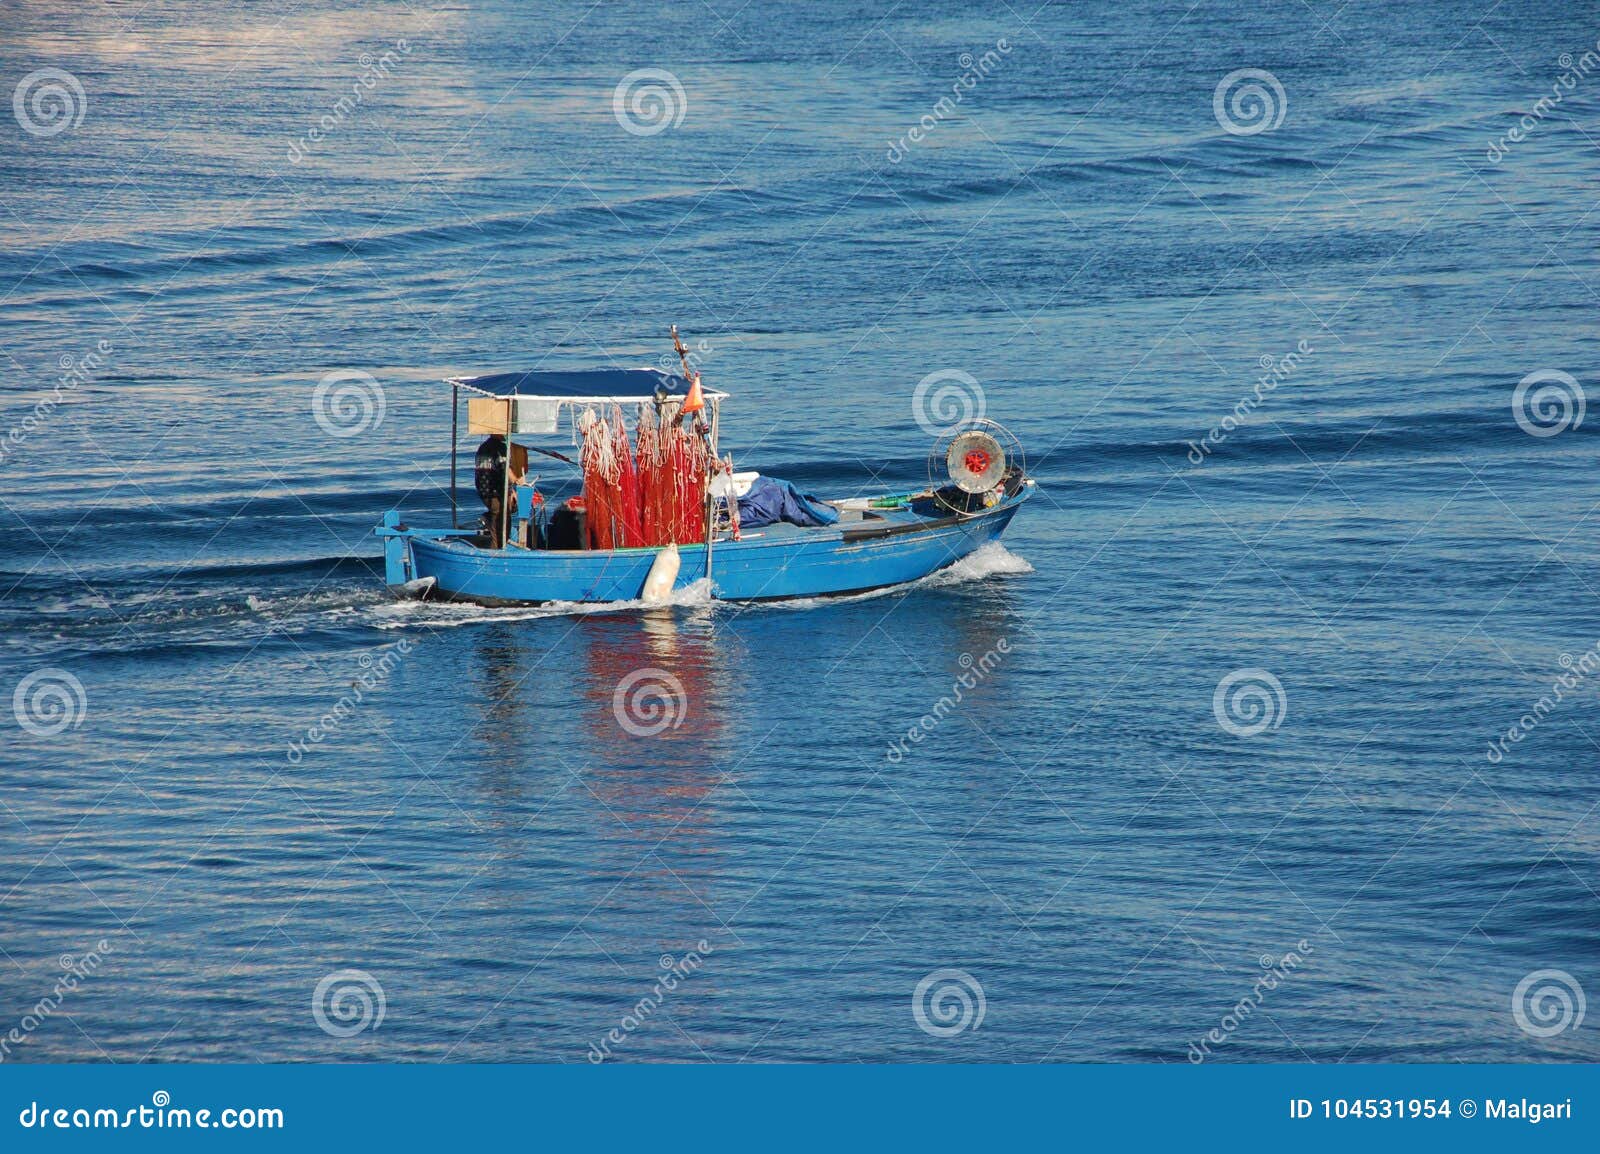 boat of a lone fisherman in navigation for work a